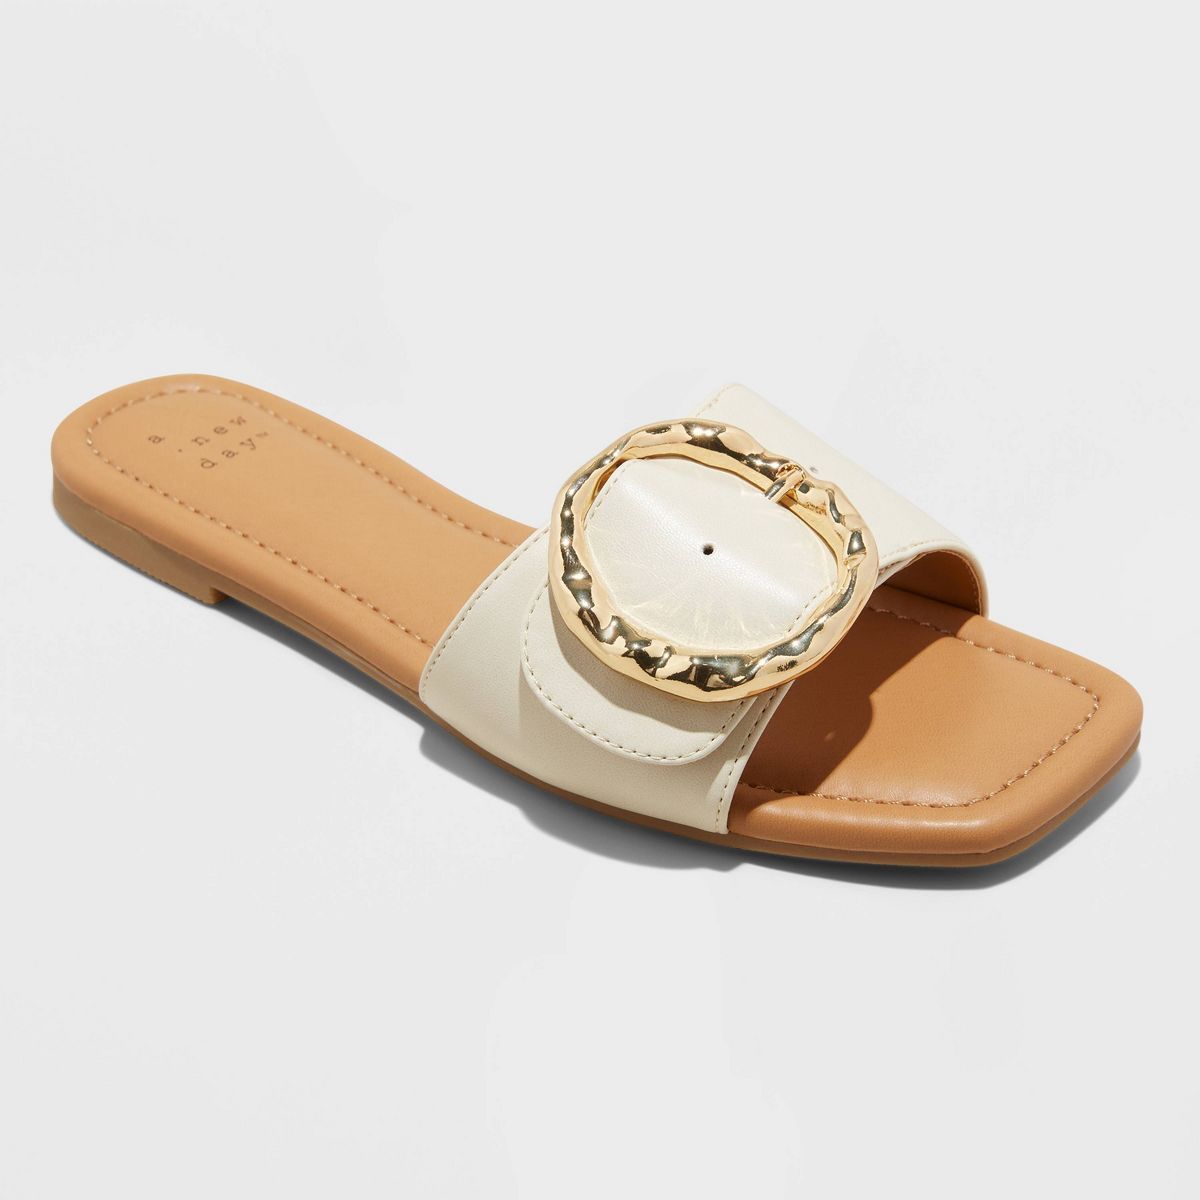 Women's Bennie Buckle Slide Sandals with Memory Foam Insole - A New Day™ Cream 10 | Target